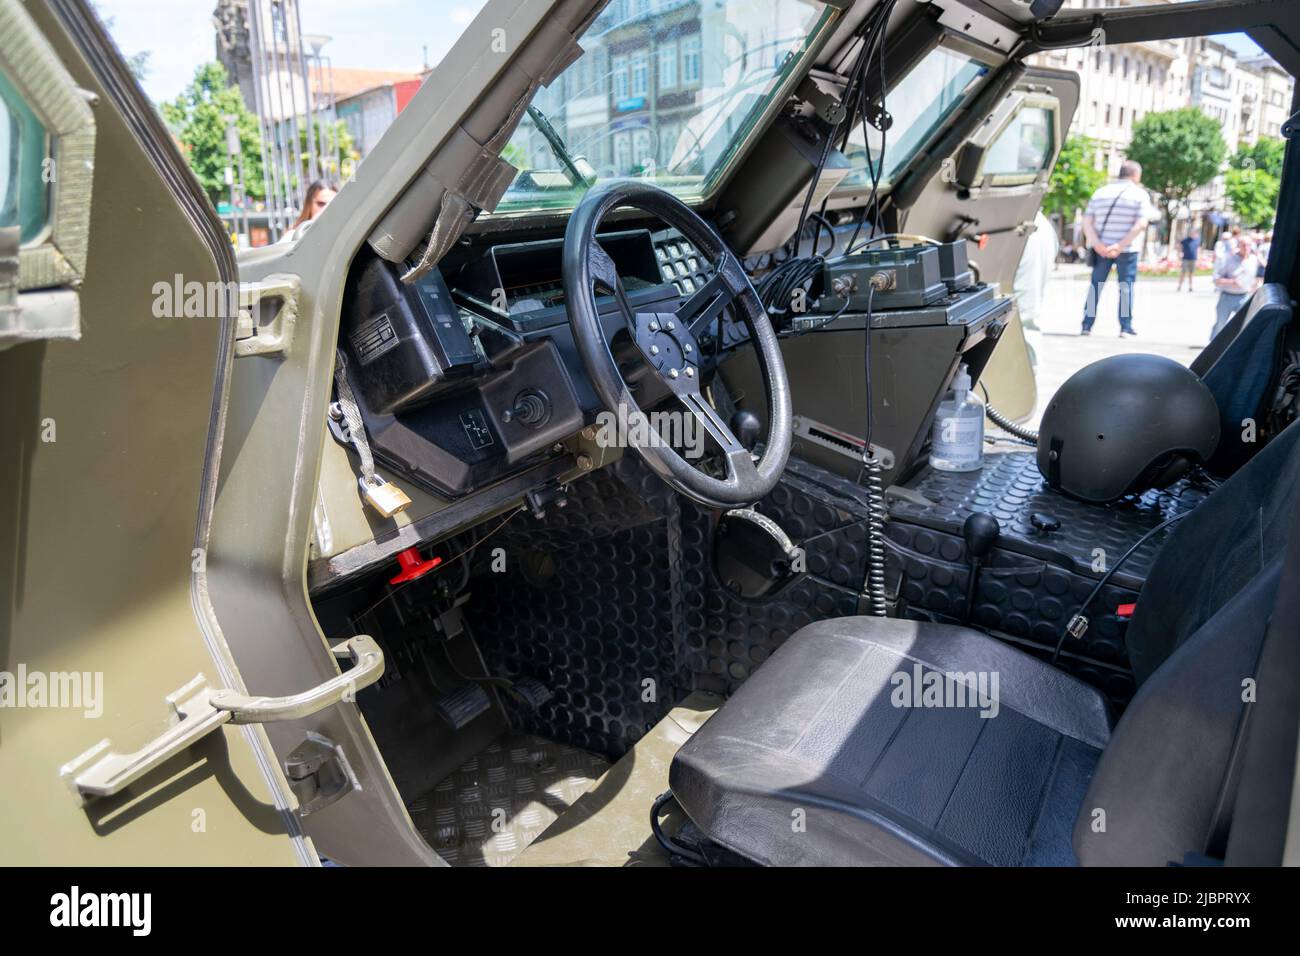 Urban war scenario, military equipment inside a combat vehicle. NATO military forces. Panhard M11D 4x4 M/89-91. Light armored vehicles. Stock Photo